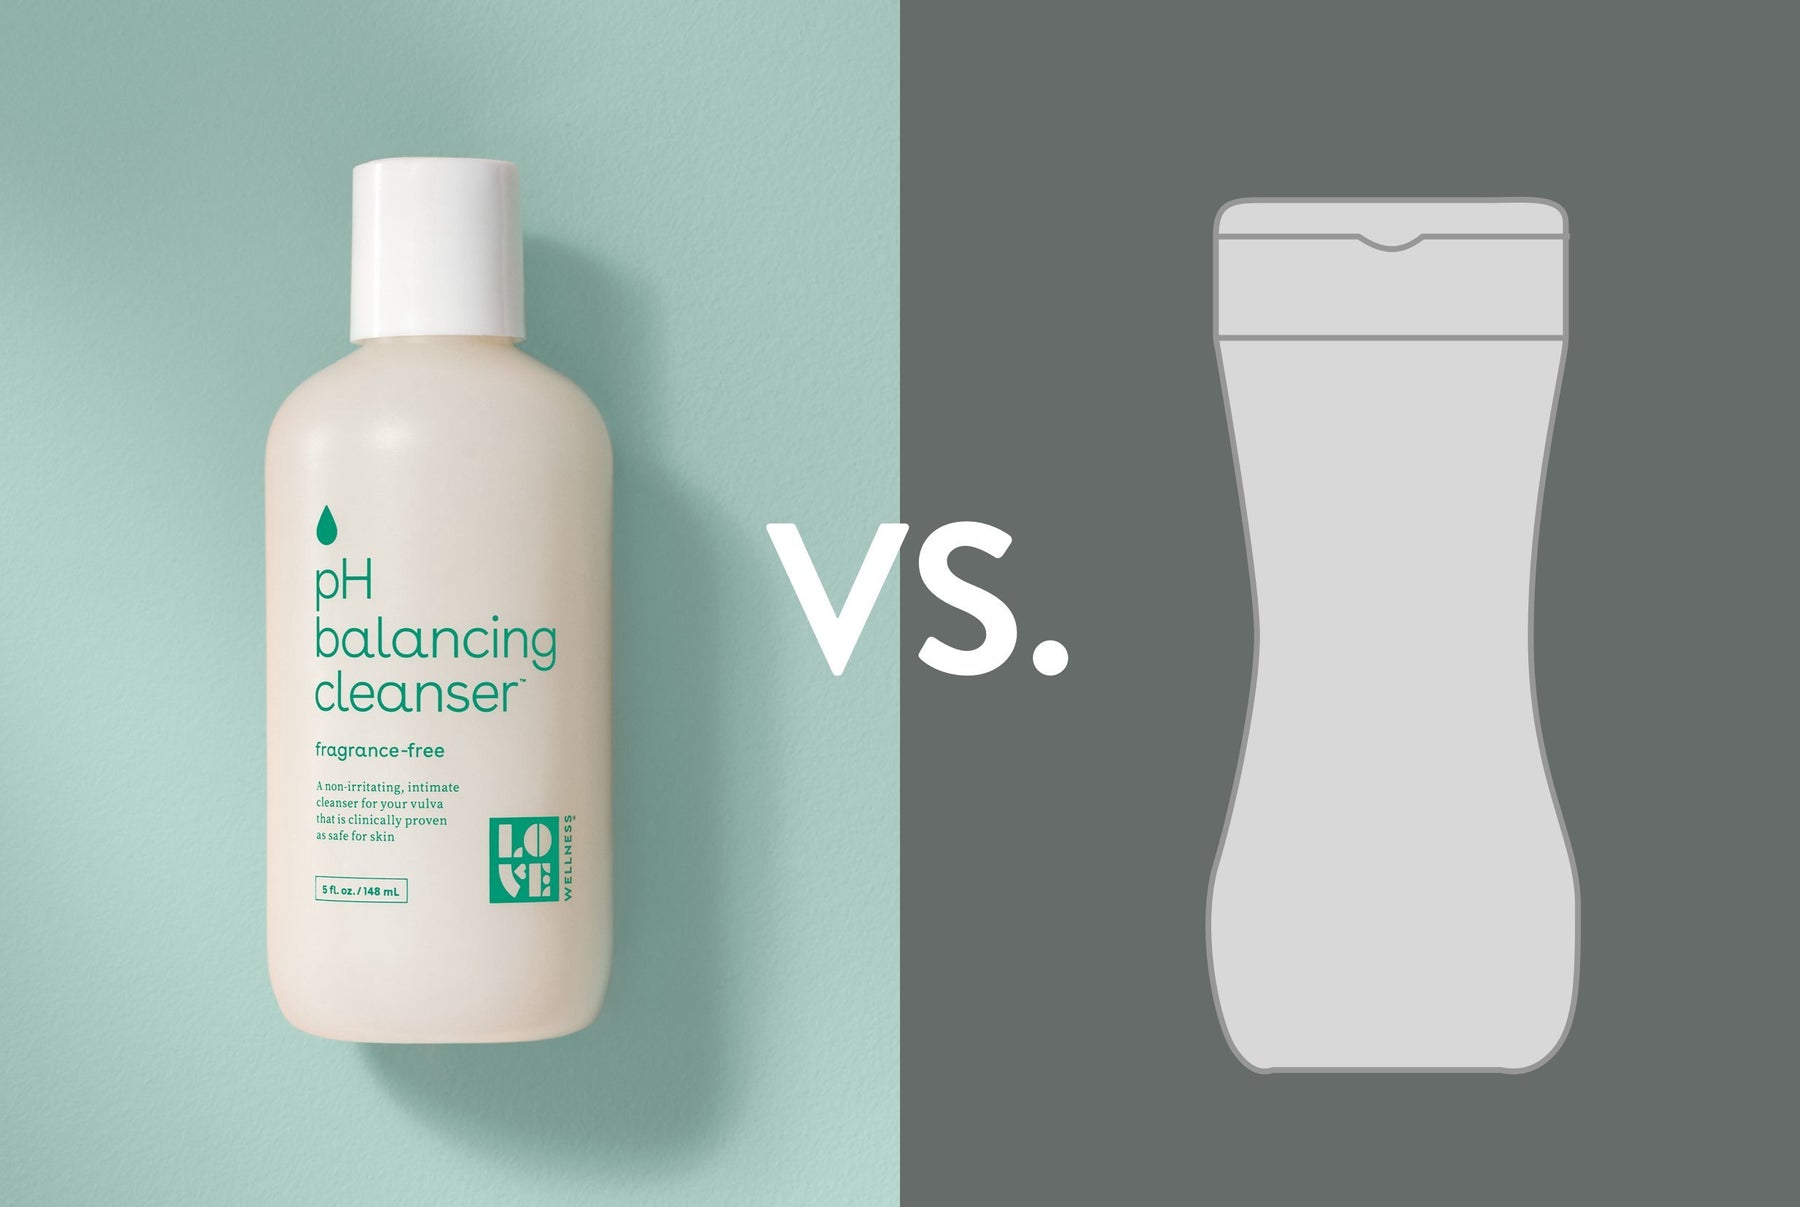 How pH Balancing Cleanser Beats The Competition